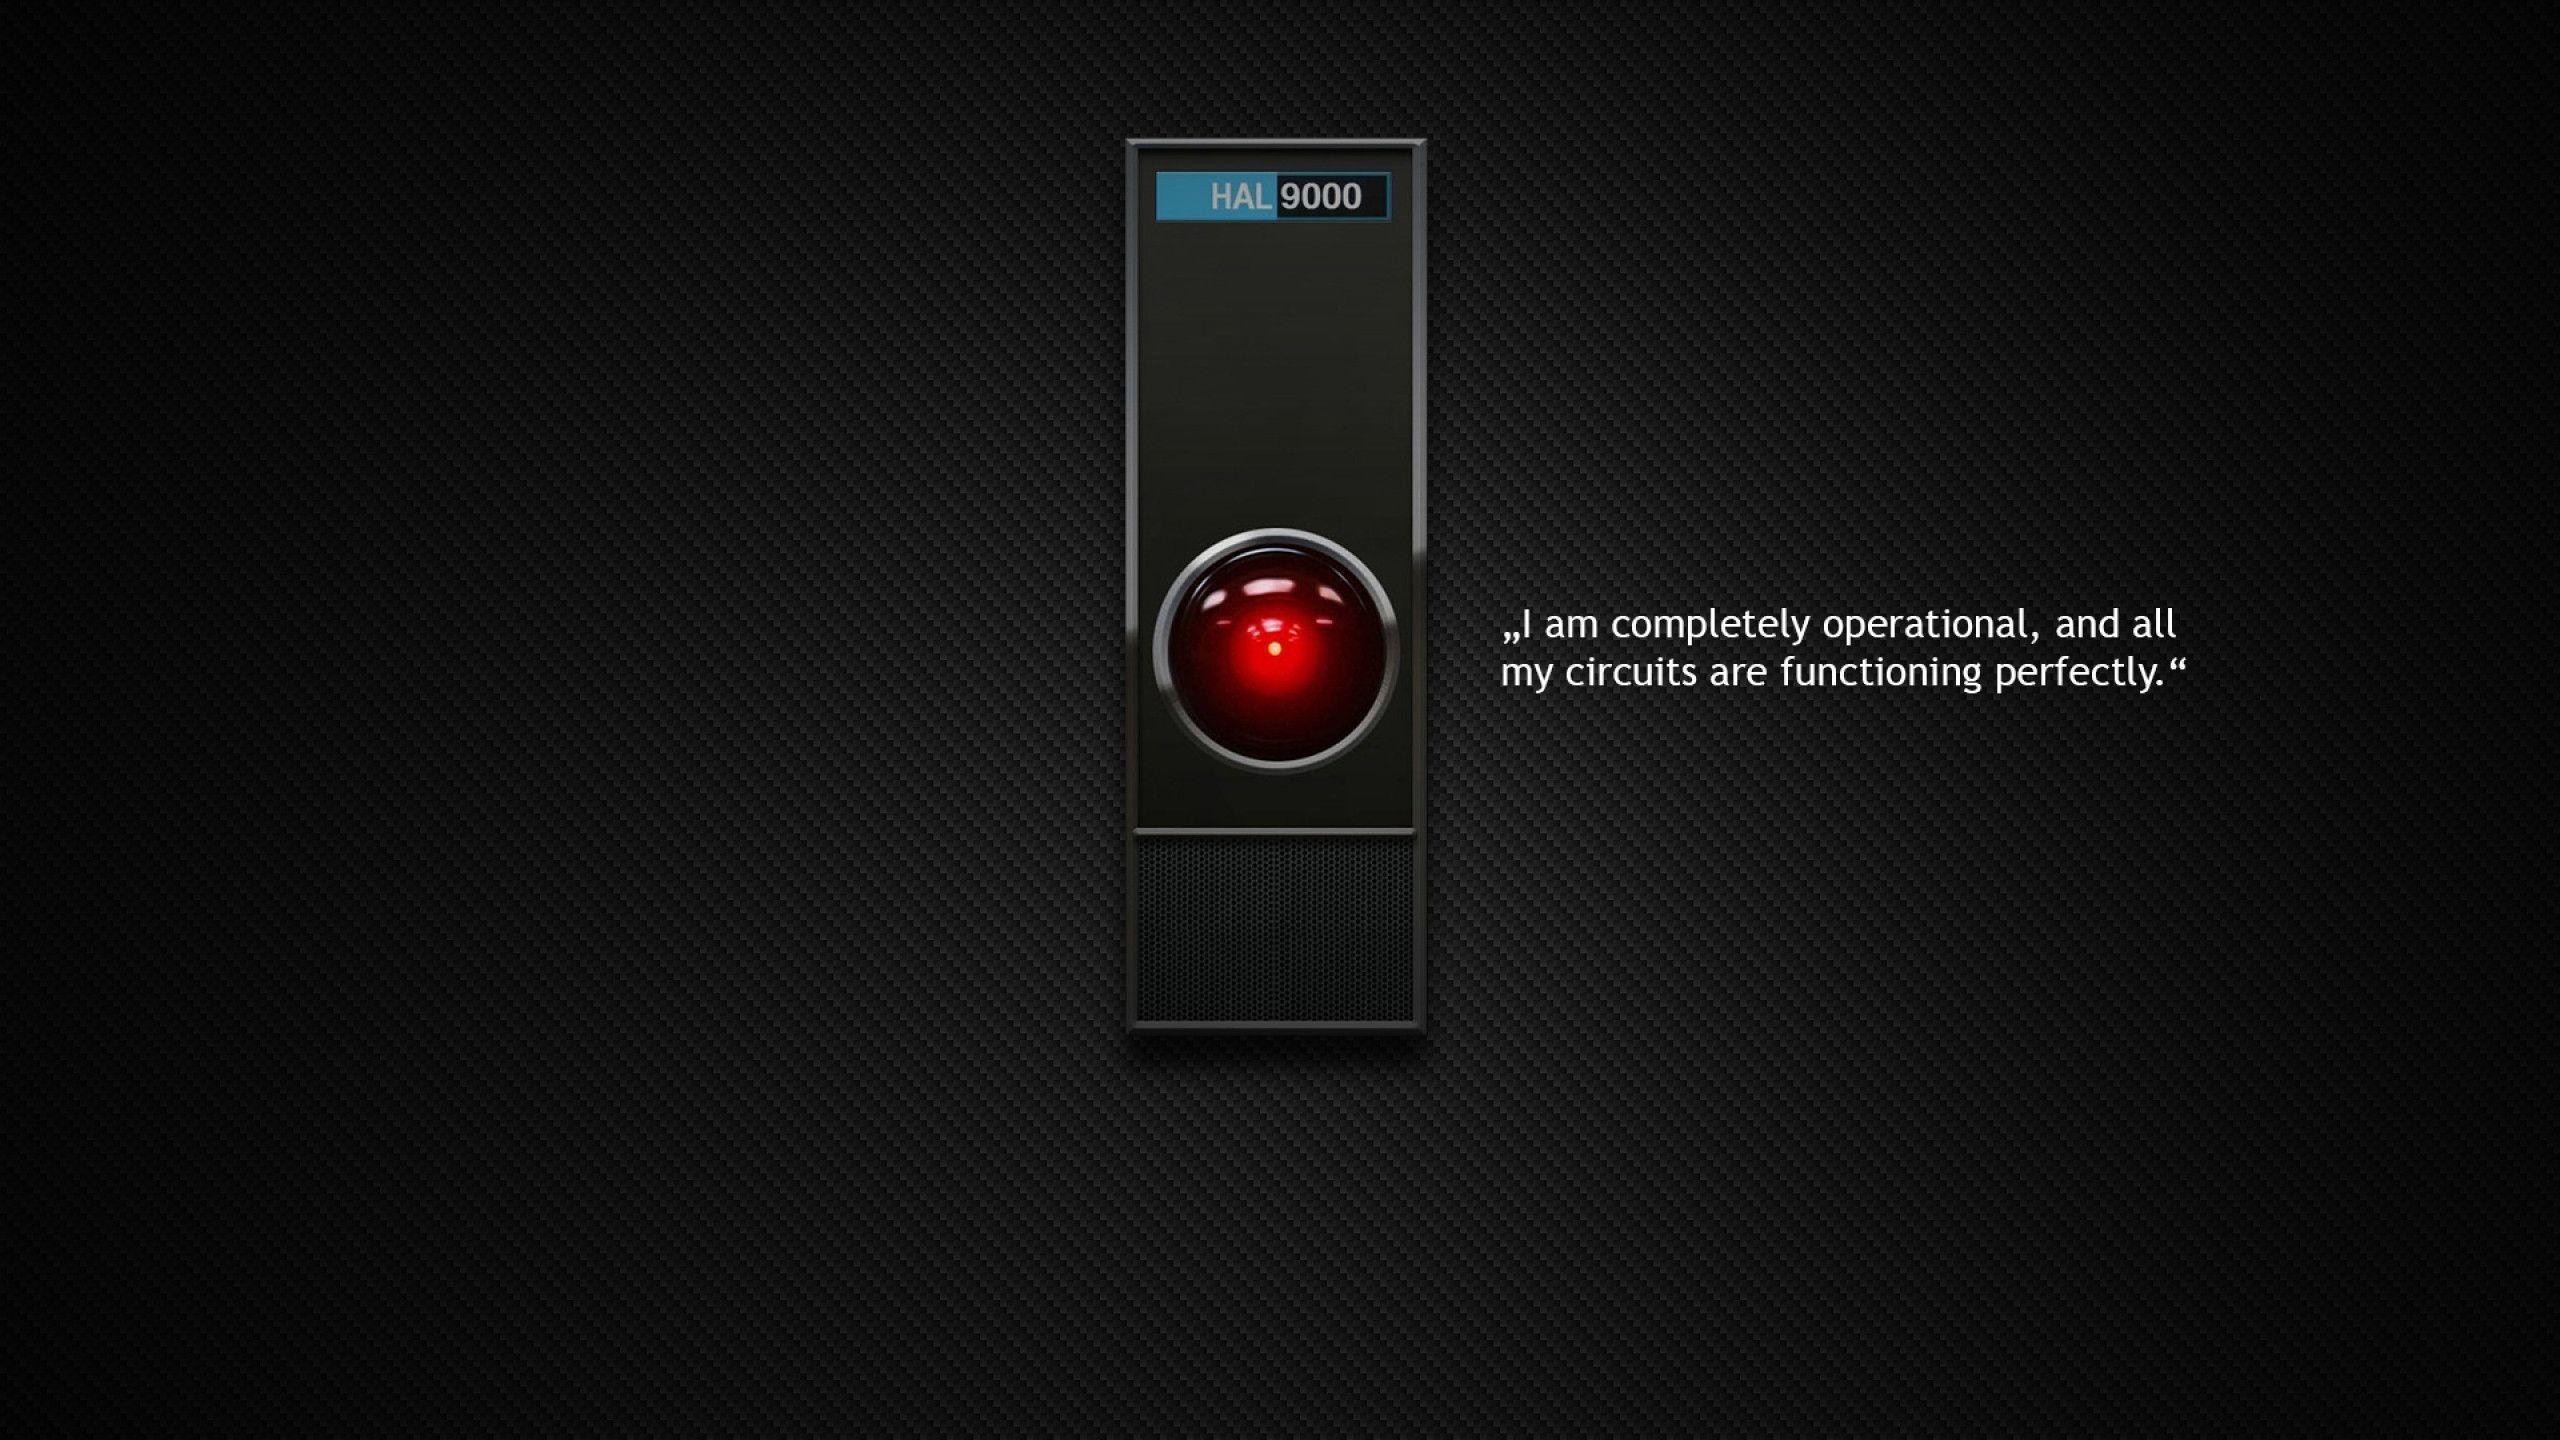 2560x1440 Download 2001: A Space Odyssey Hal 9000 wallpaper,Download .